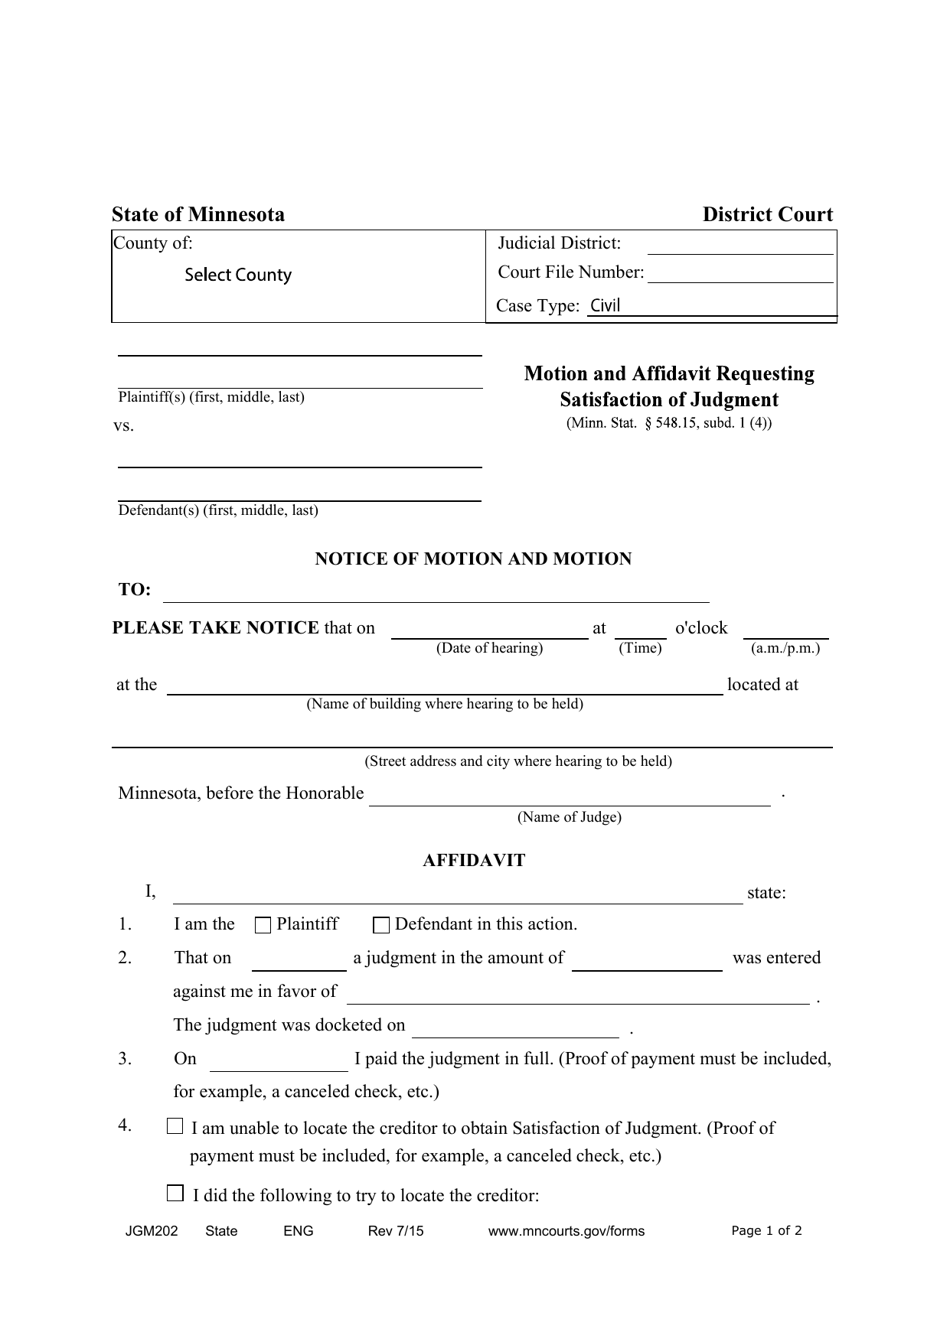 Form JGM202 Motion and Affidavit Requesting Satisfaction of Judgment - Minnesota, Page 1